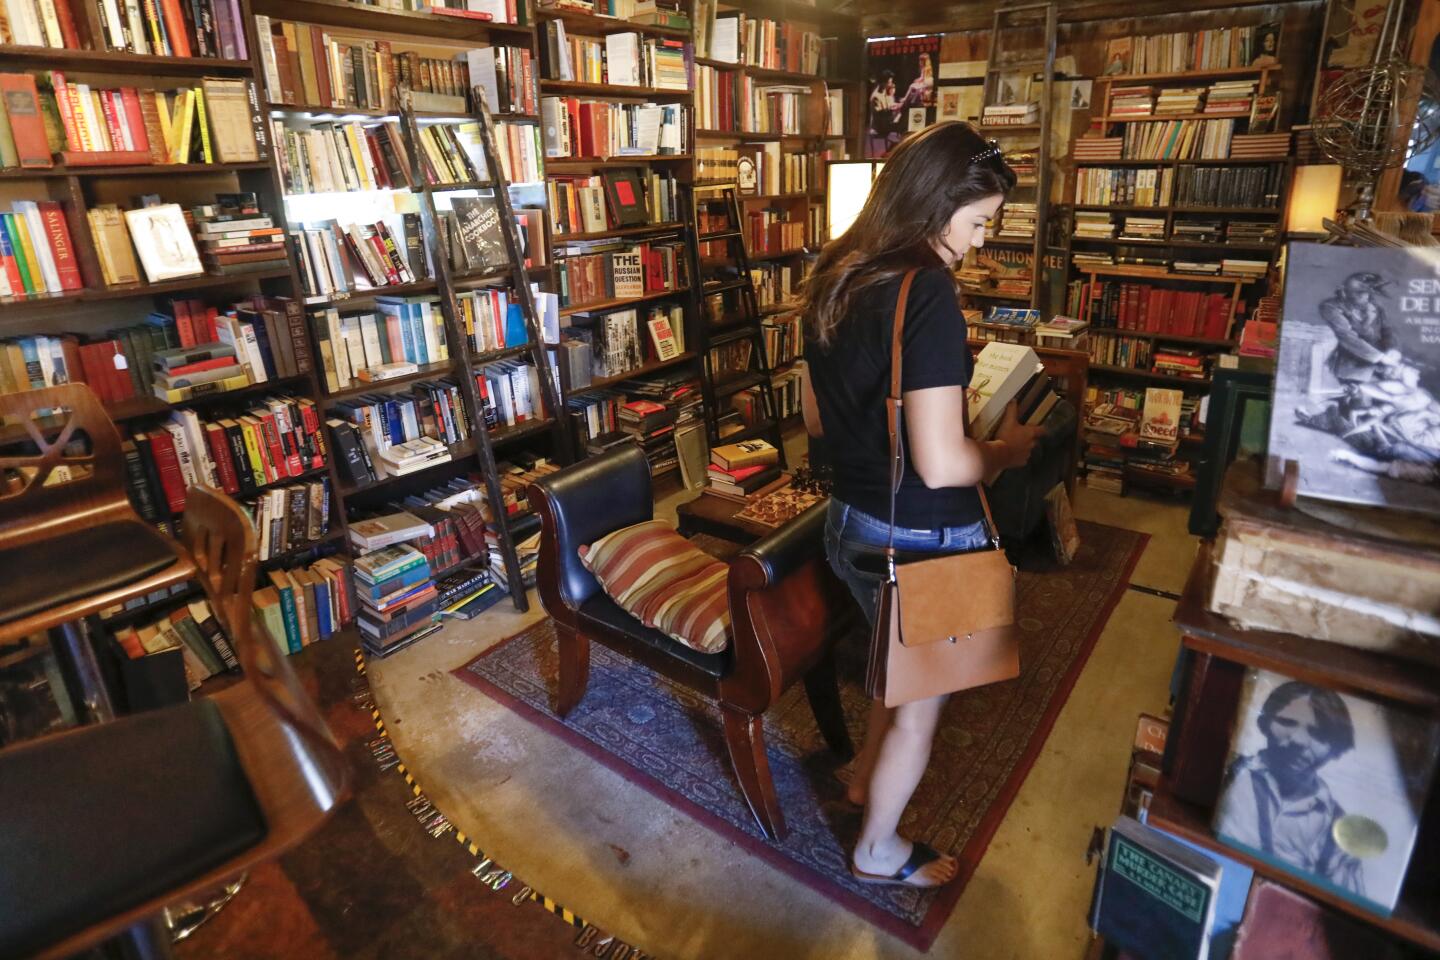 Rebecca Reiser of Carlsbad browses the books at Lhooq Books, a funky vintage bookstore in Carlsbad Village. Sean Christopher, the owner recently received a 60-day eviction notice for both the shop and the adjoining house where he has raised his son, alone. He's hoping to achieve a stay of eviction on the property long enough to sell off his book inventory and find a new space without going bankrupt and ending up homeless with his son.